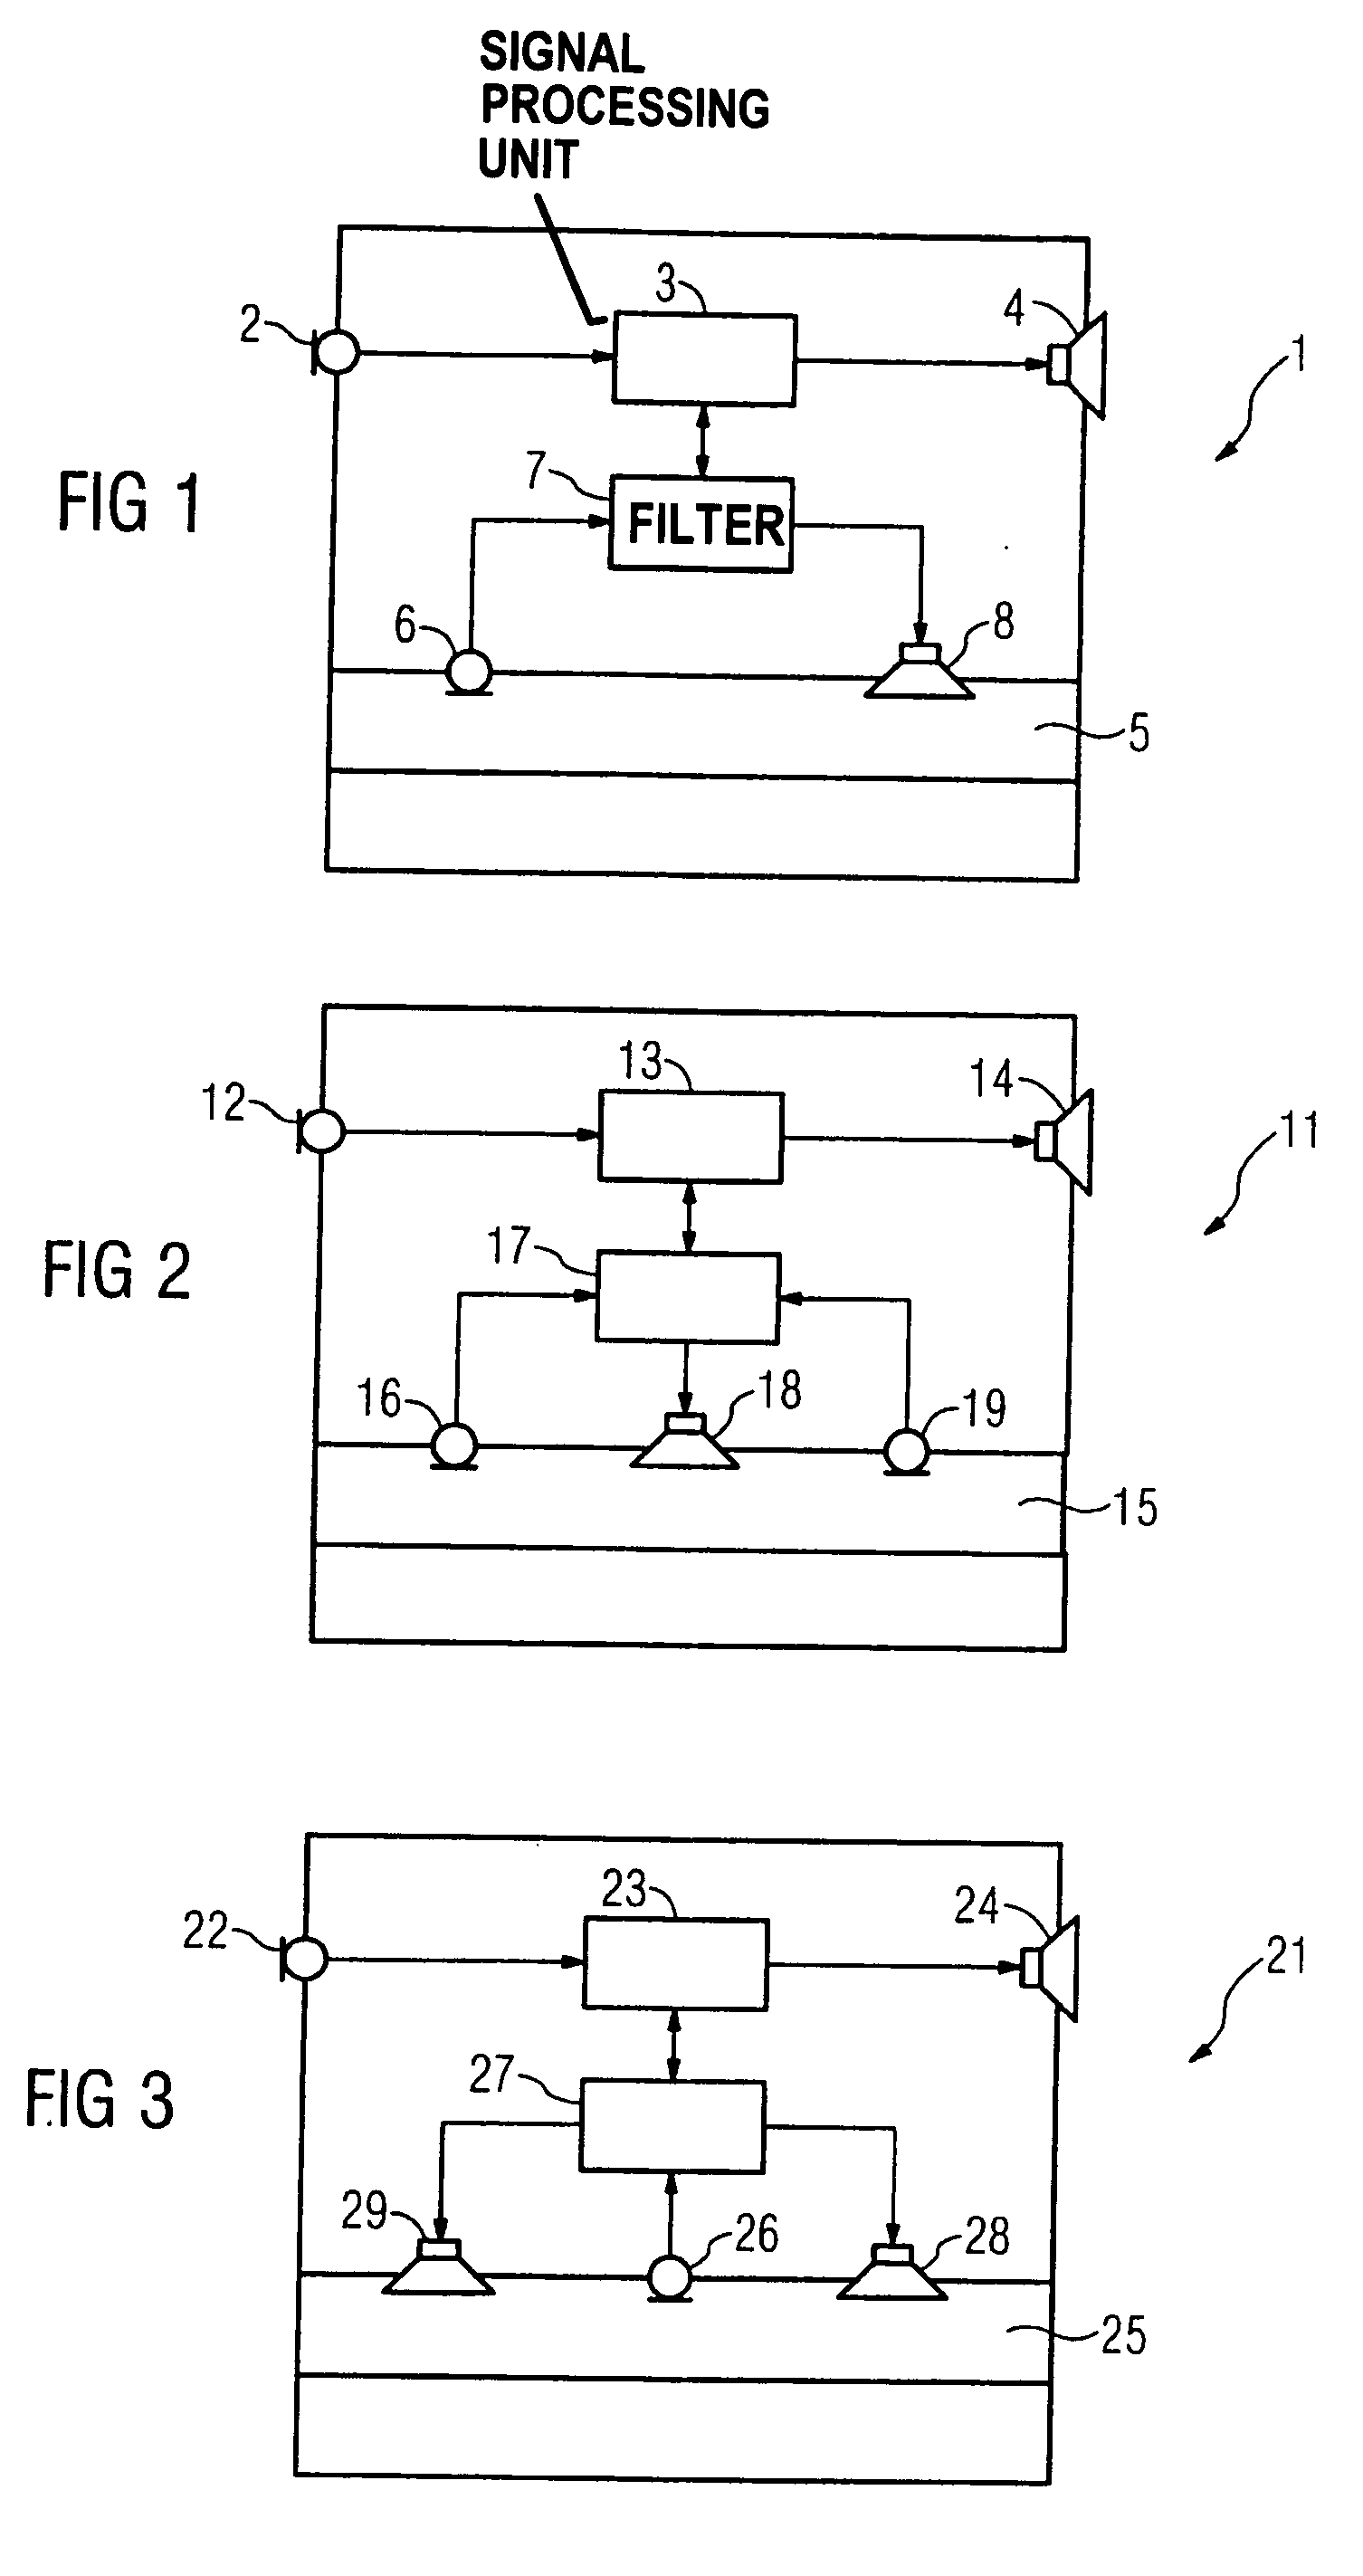 Active noise suppression for a hearing aid device which can be worn in the ear or a hearing aid device with otoplastic which can be worn in the ear